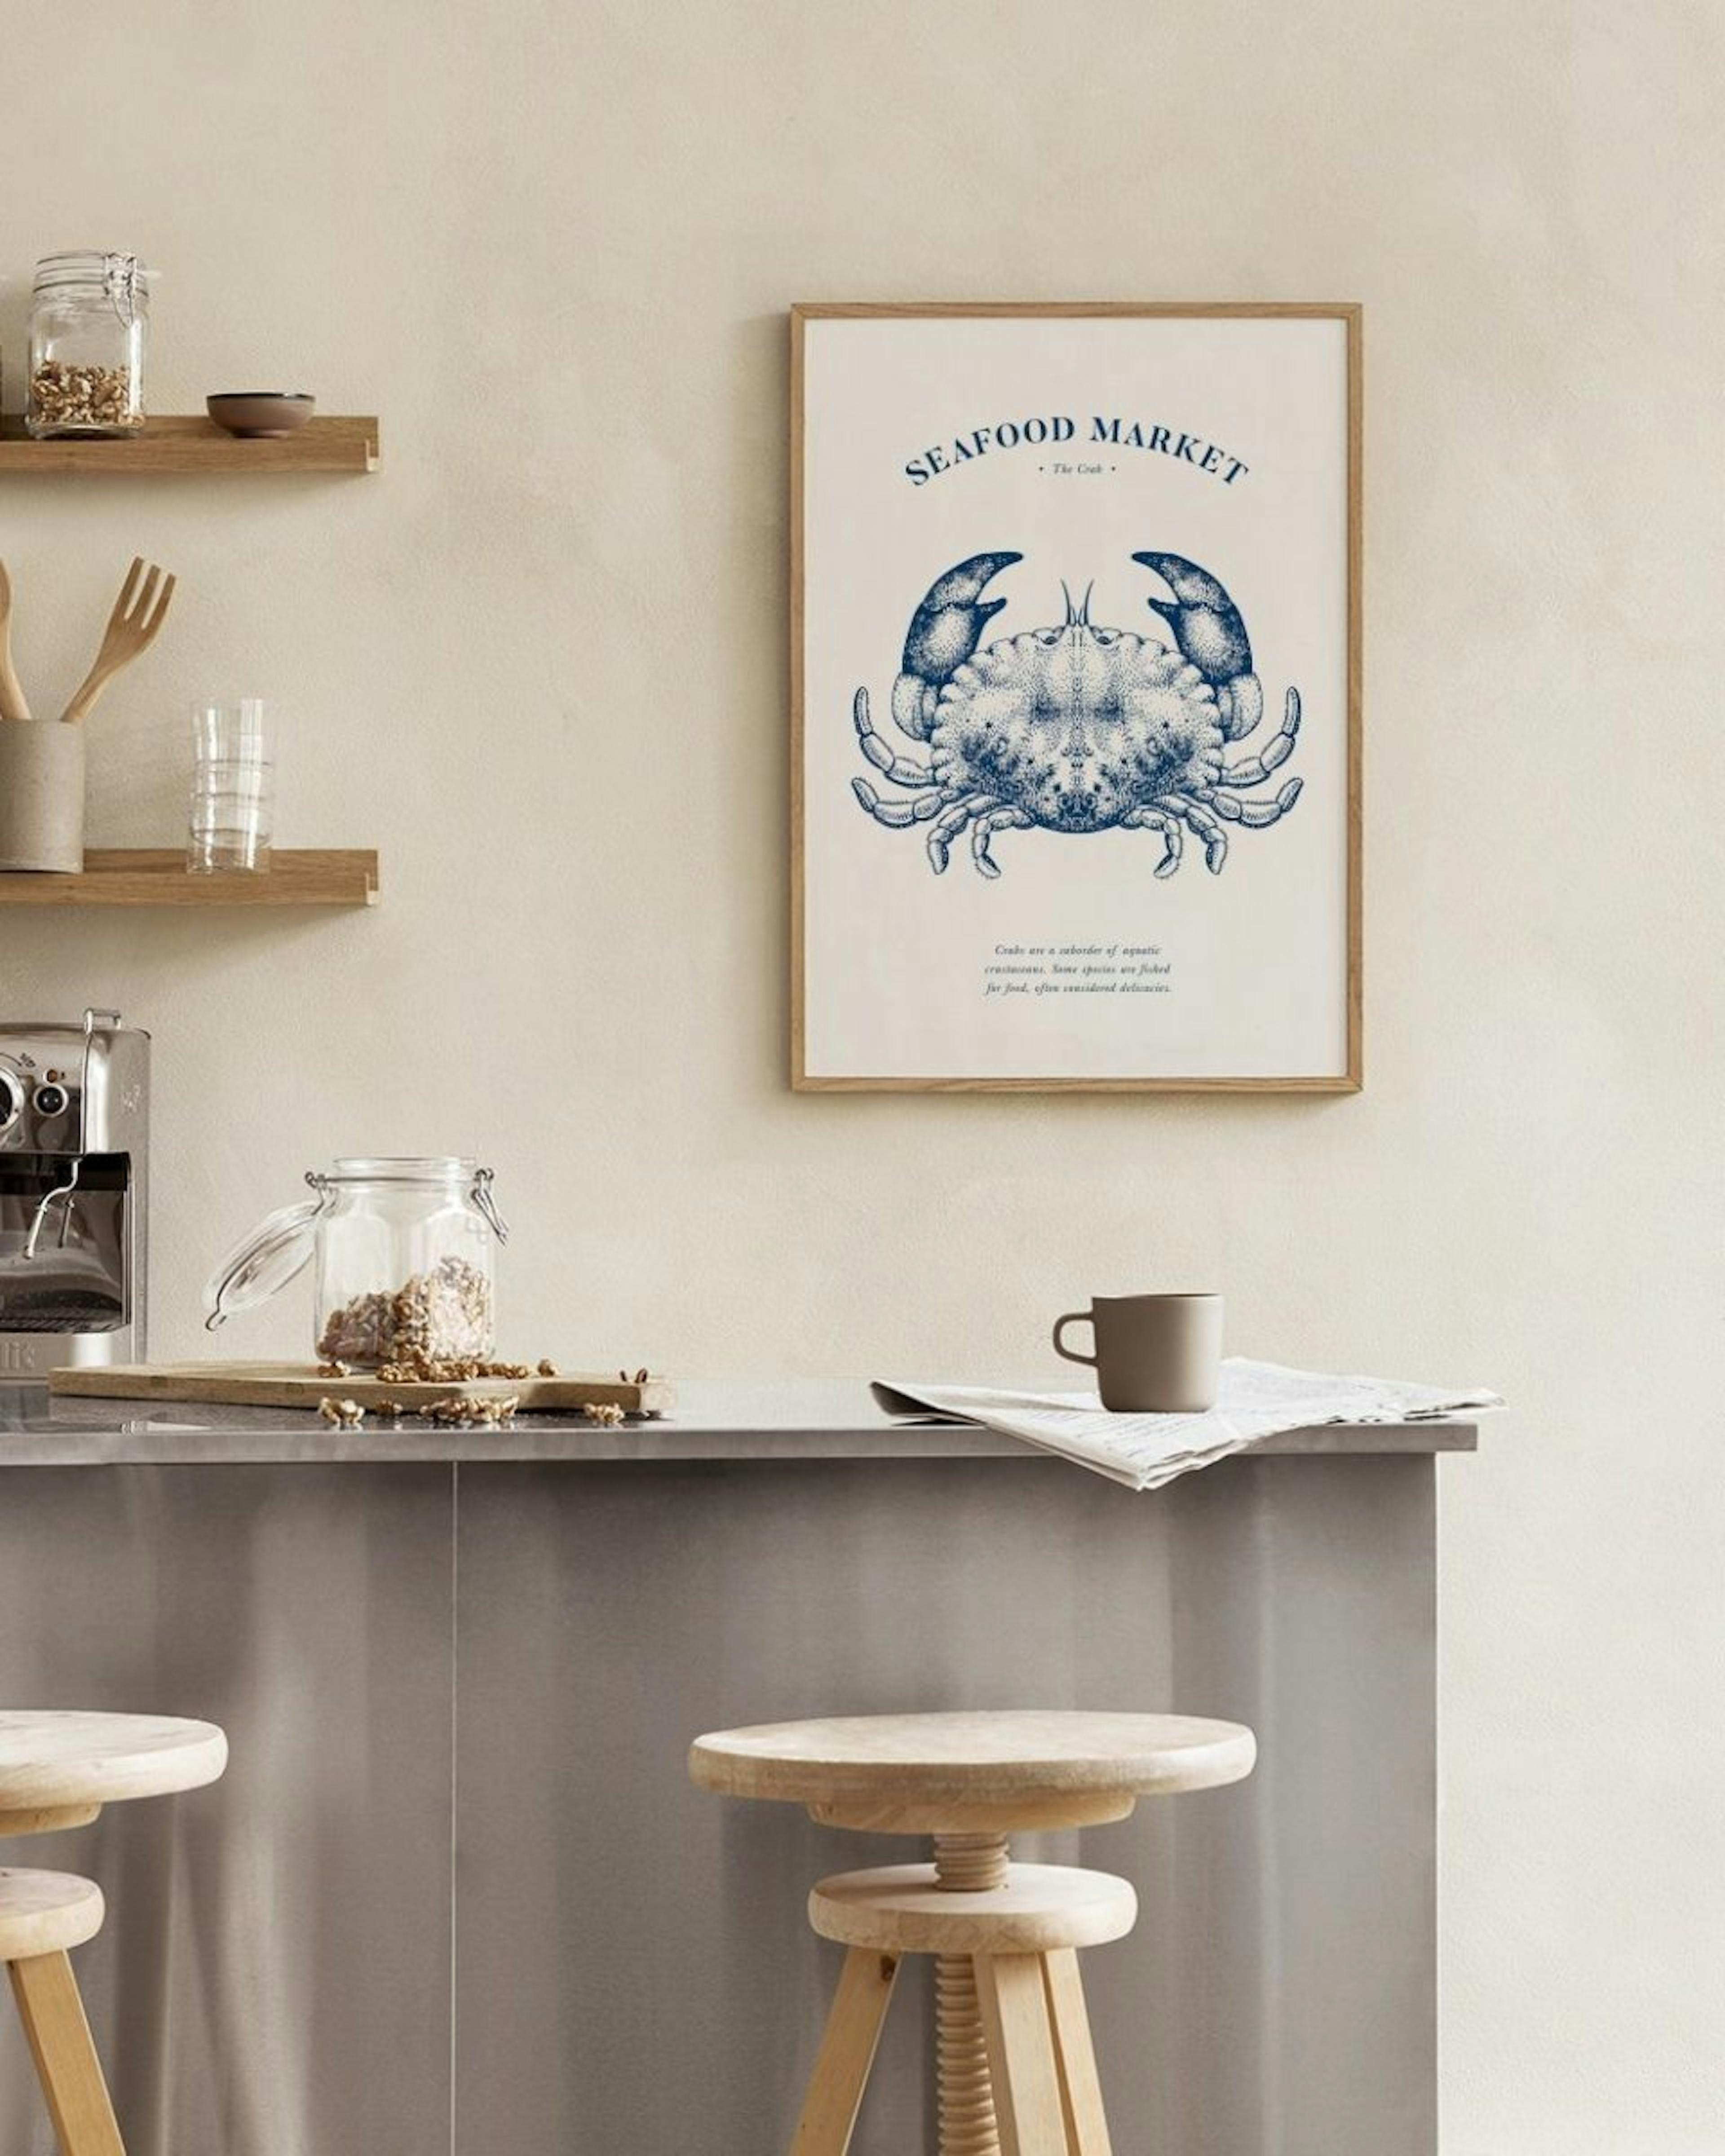 Seafood Market - The Crab Poster